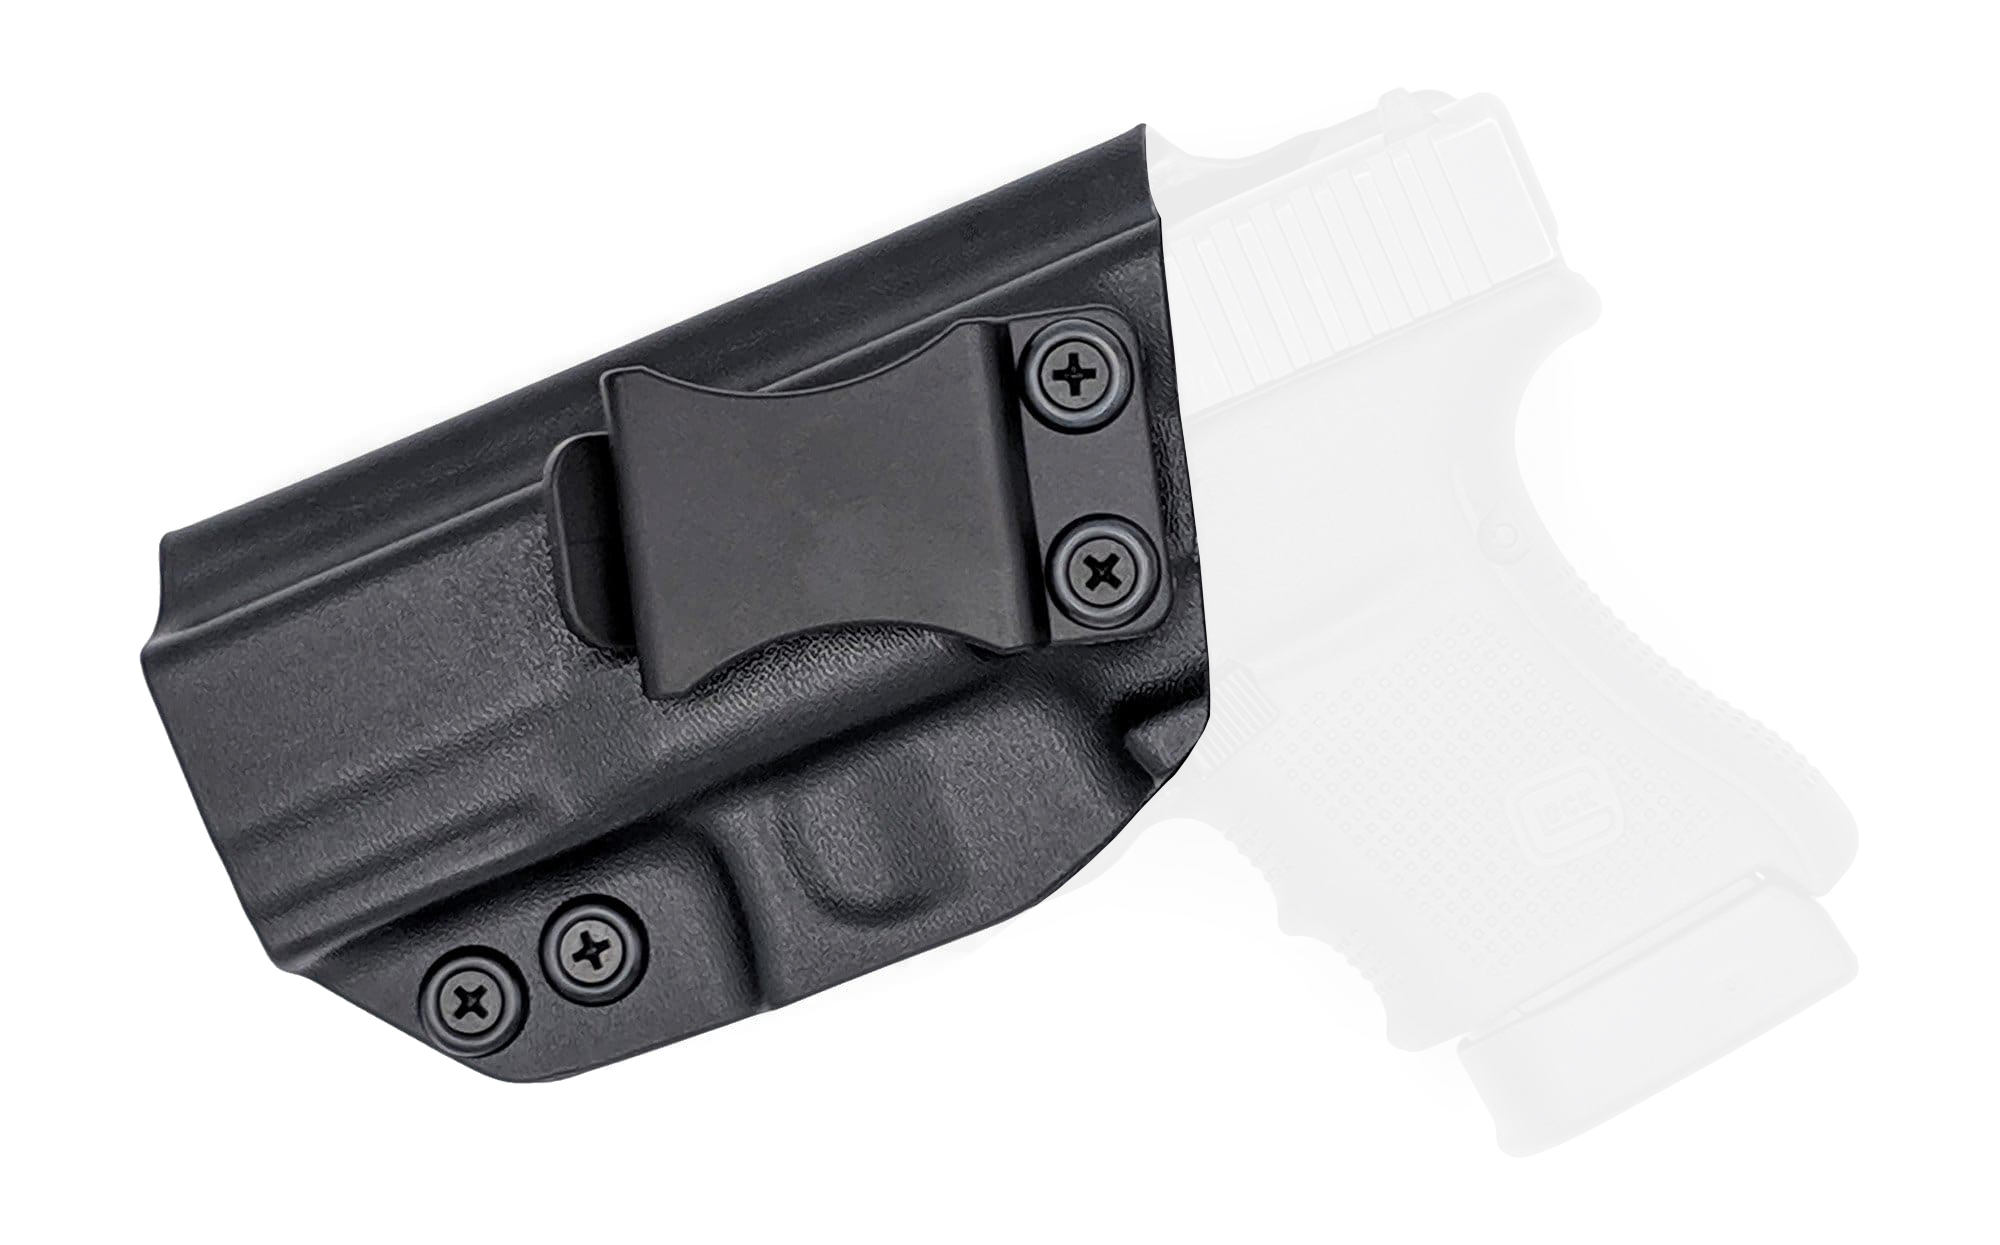 IWB/OWB Glock Holster, Manufacturer : Concealment Express (Rounded Gear),  Model : Druid Glock MOS, Color : Carbon TargetZone